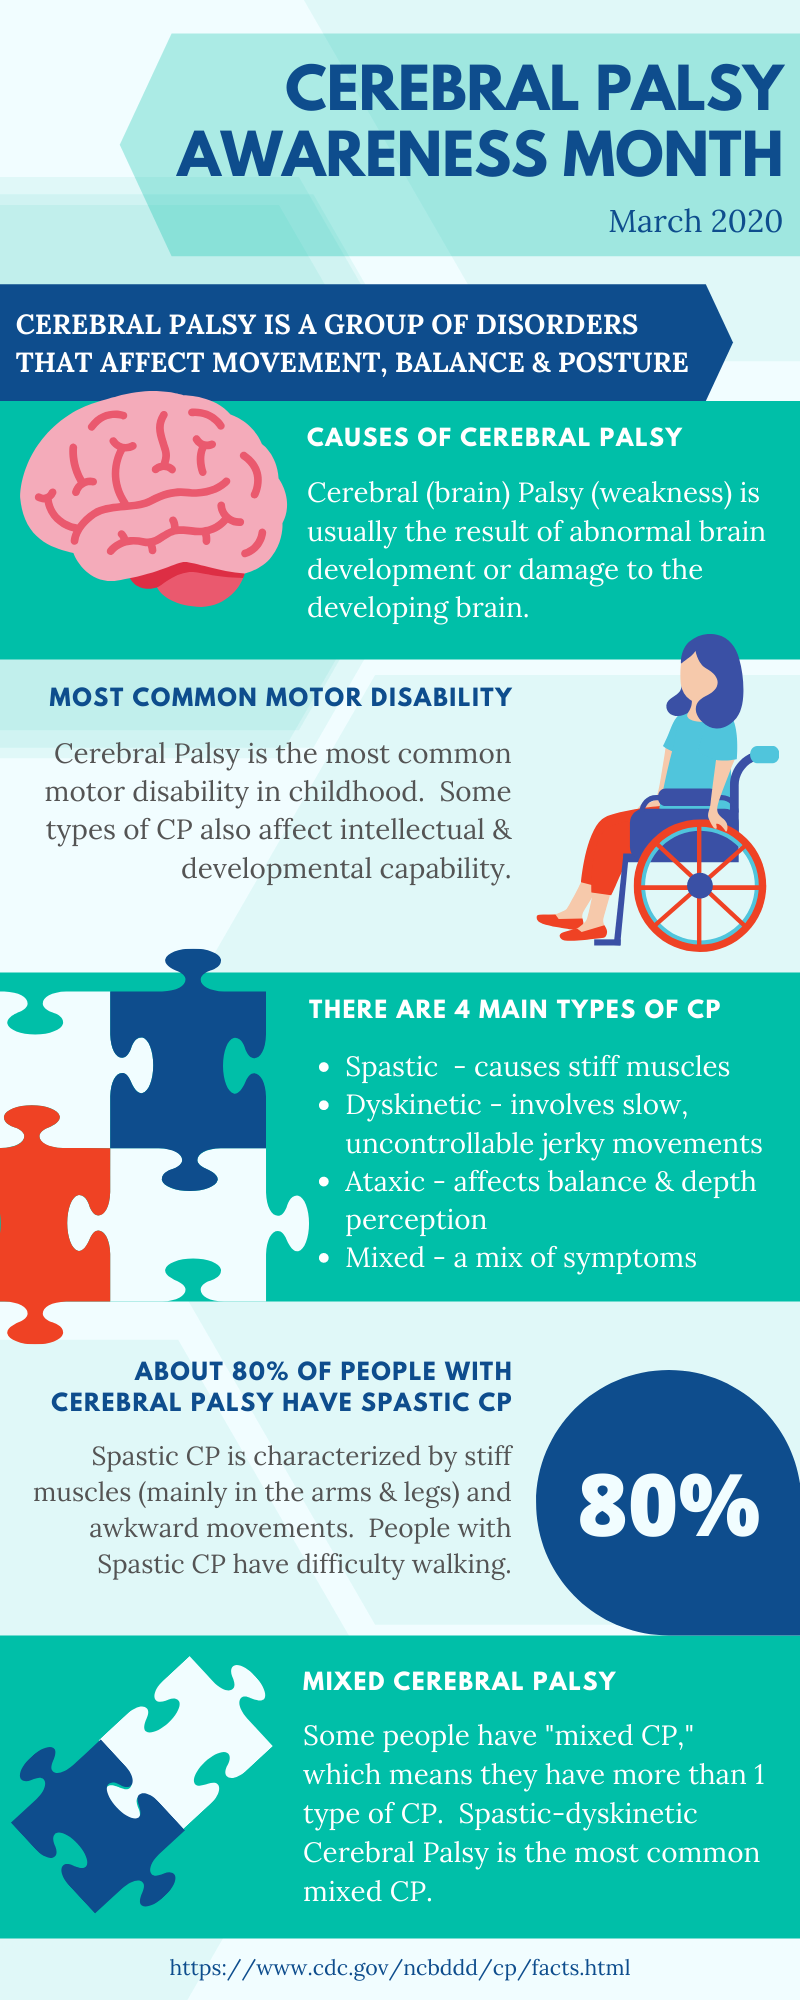 Information about Cerebral Palsy